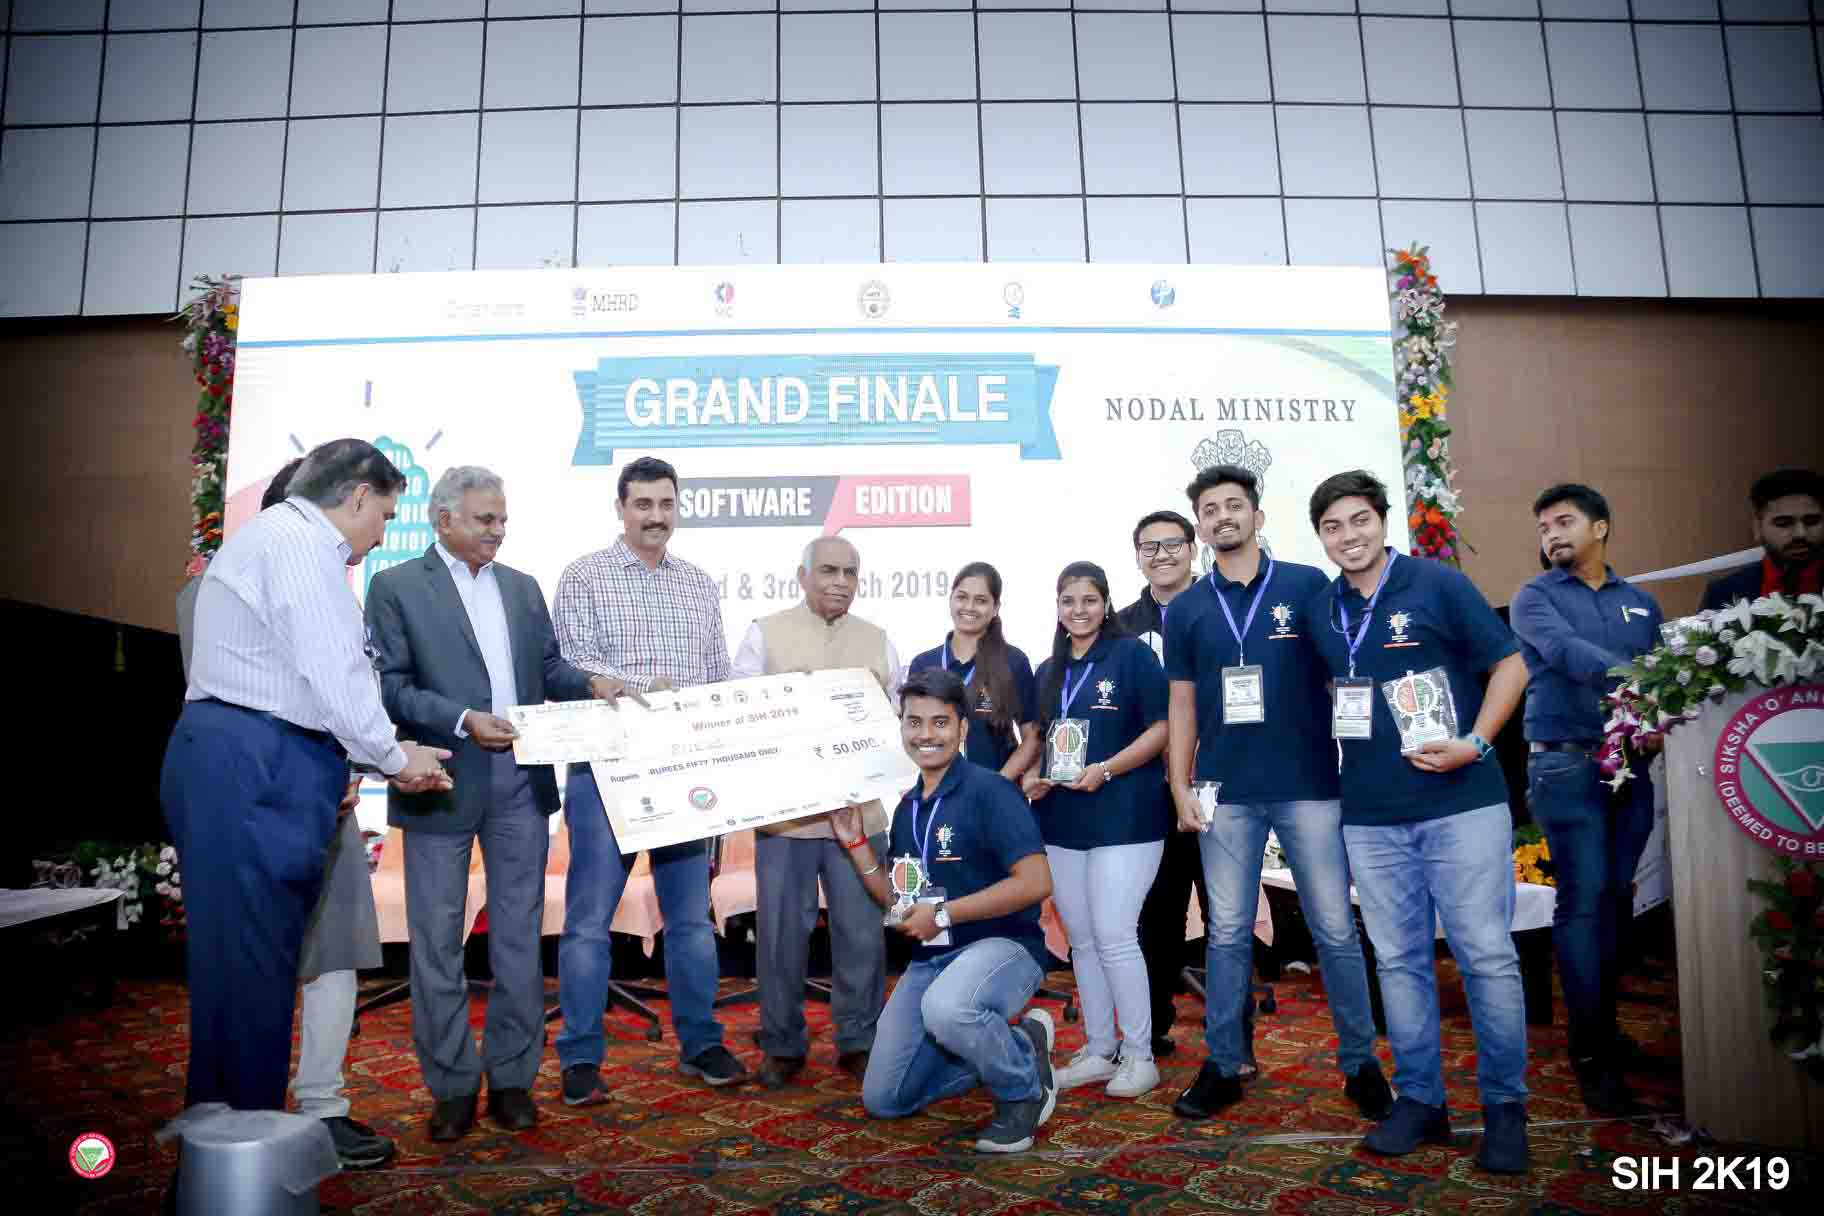 Team Byte-us Winner in Smart India Hackathon 2019 held at Bubaneshwar on 2nd and 3rd March 2019, PCCOER